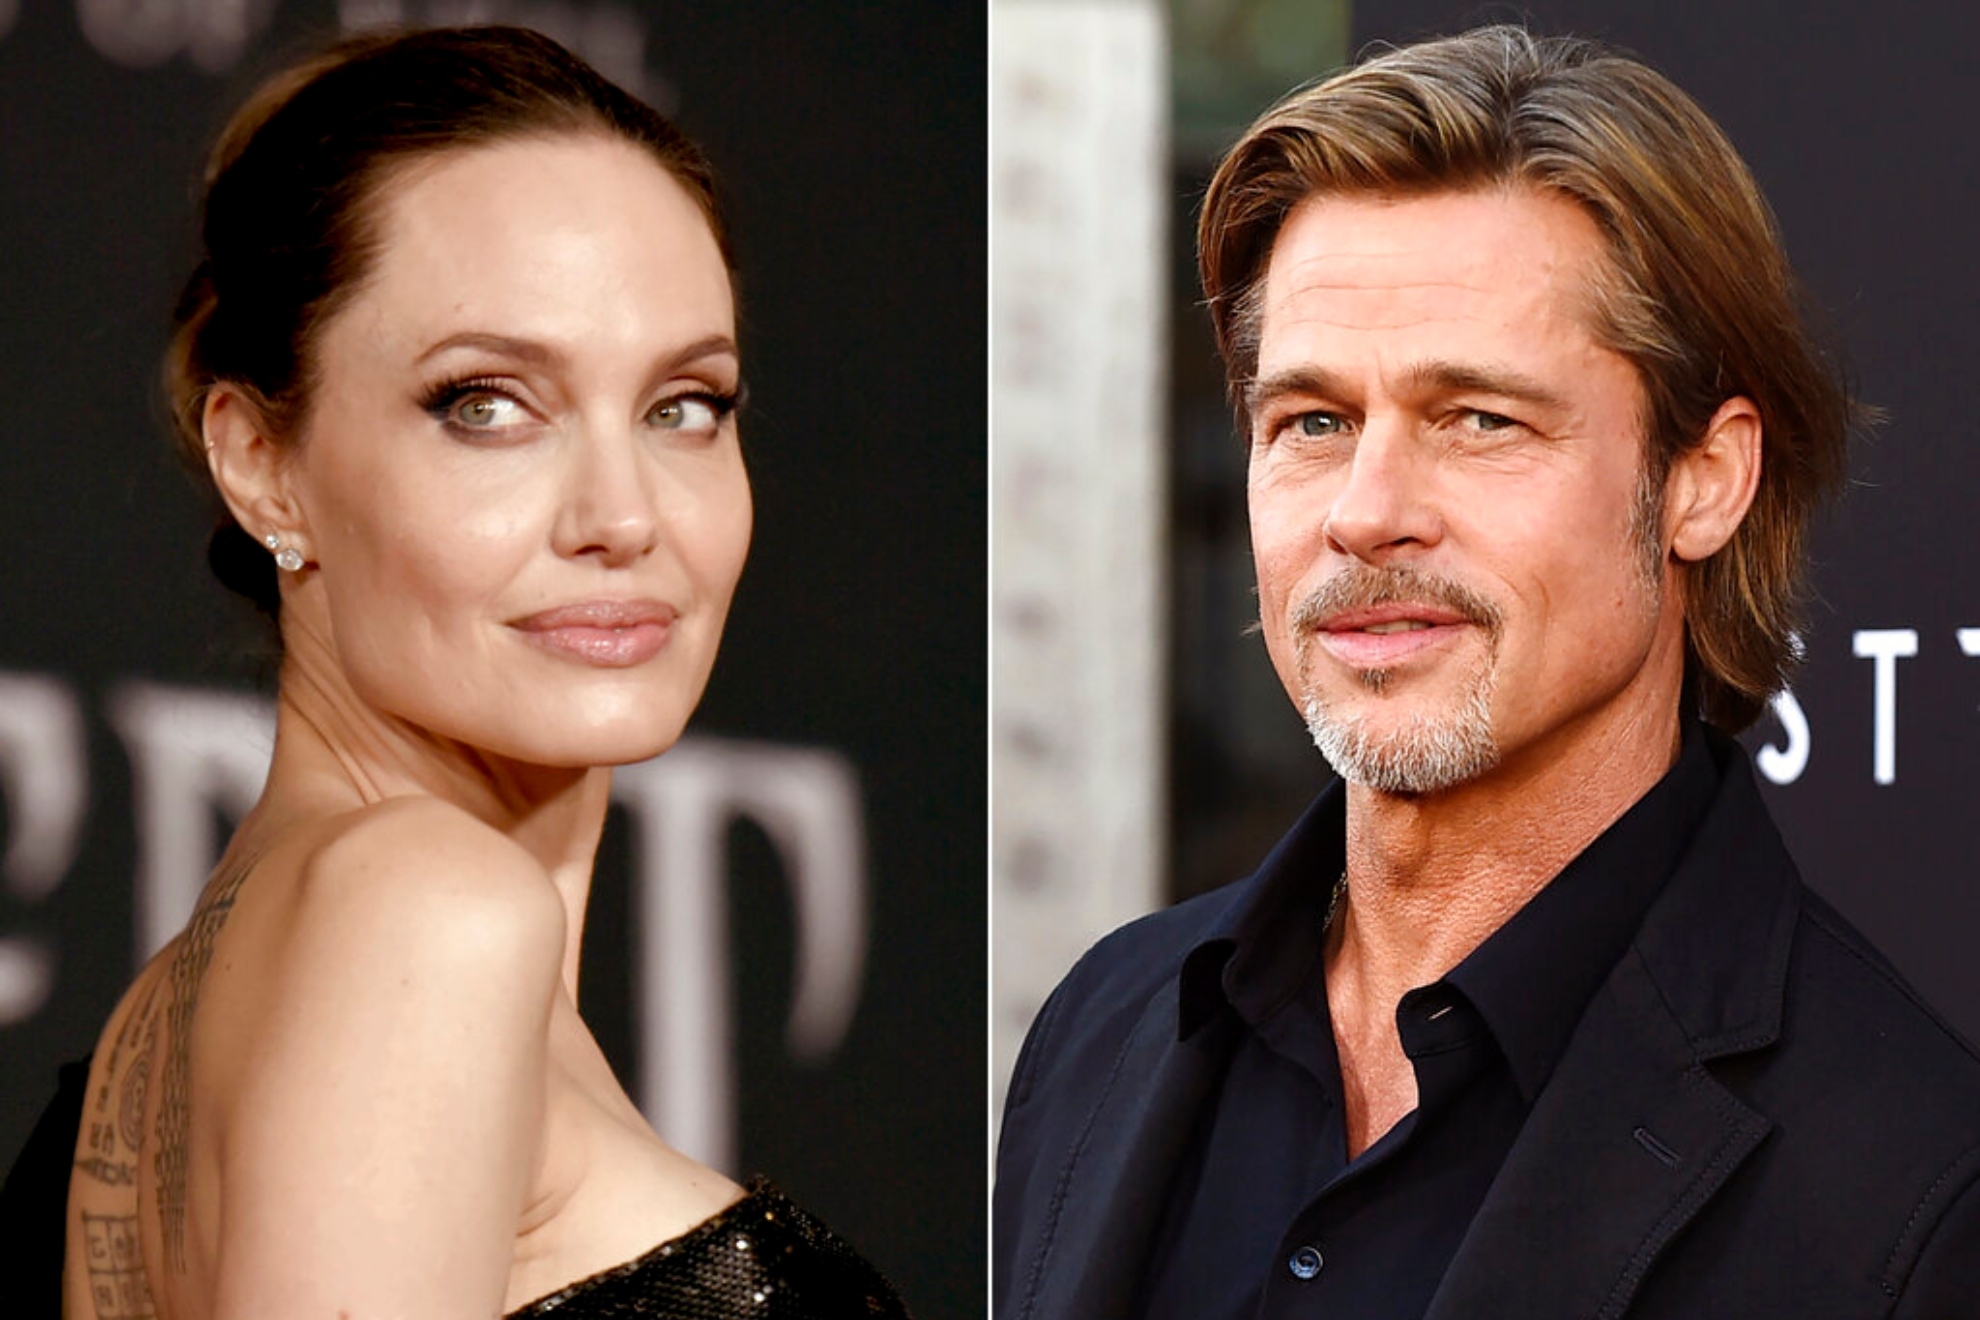 Brad Pitt and Angelina Jolie's children implore her to stop the relentless fight over custody, they are fine with Dad, per report